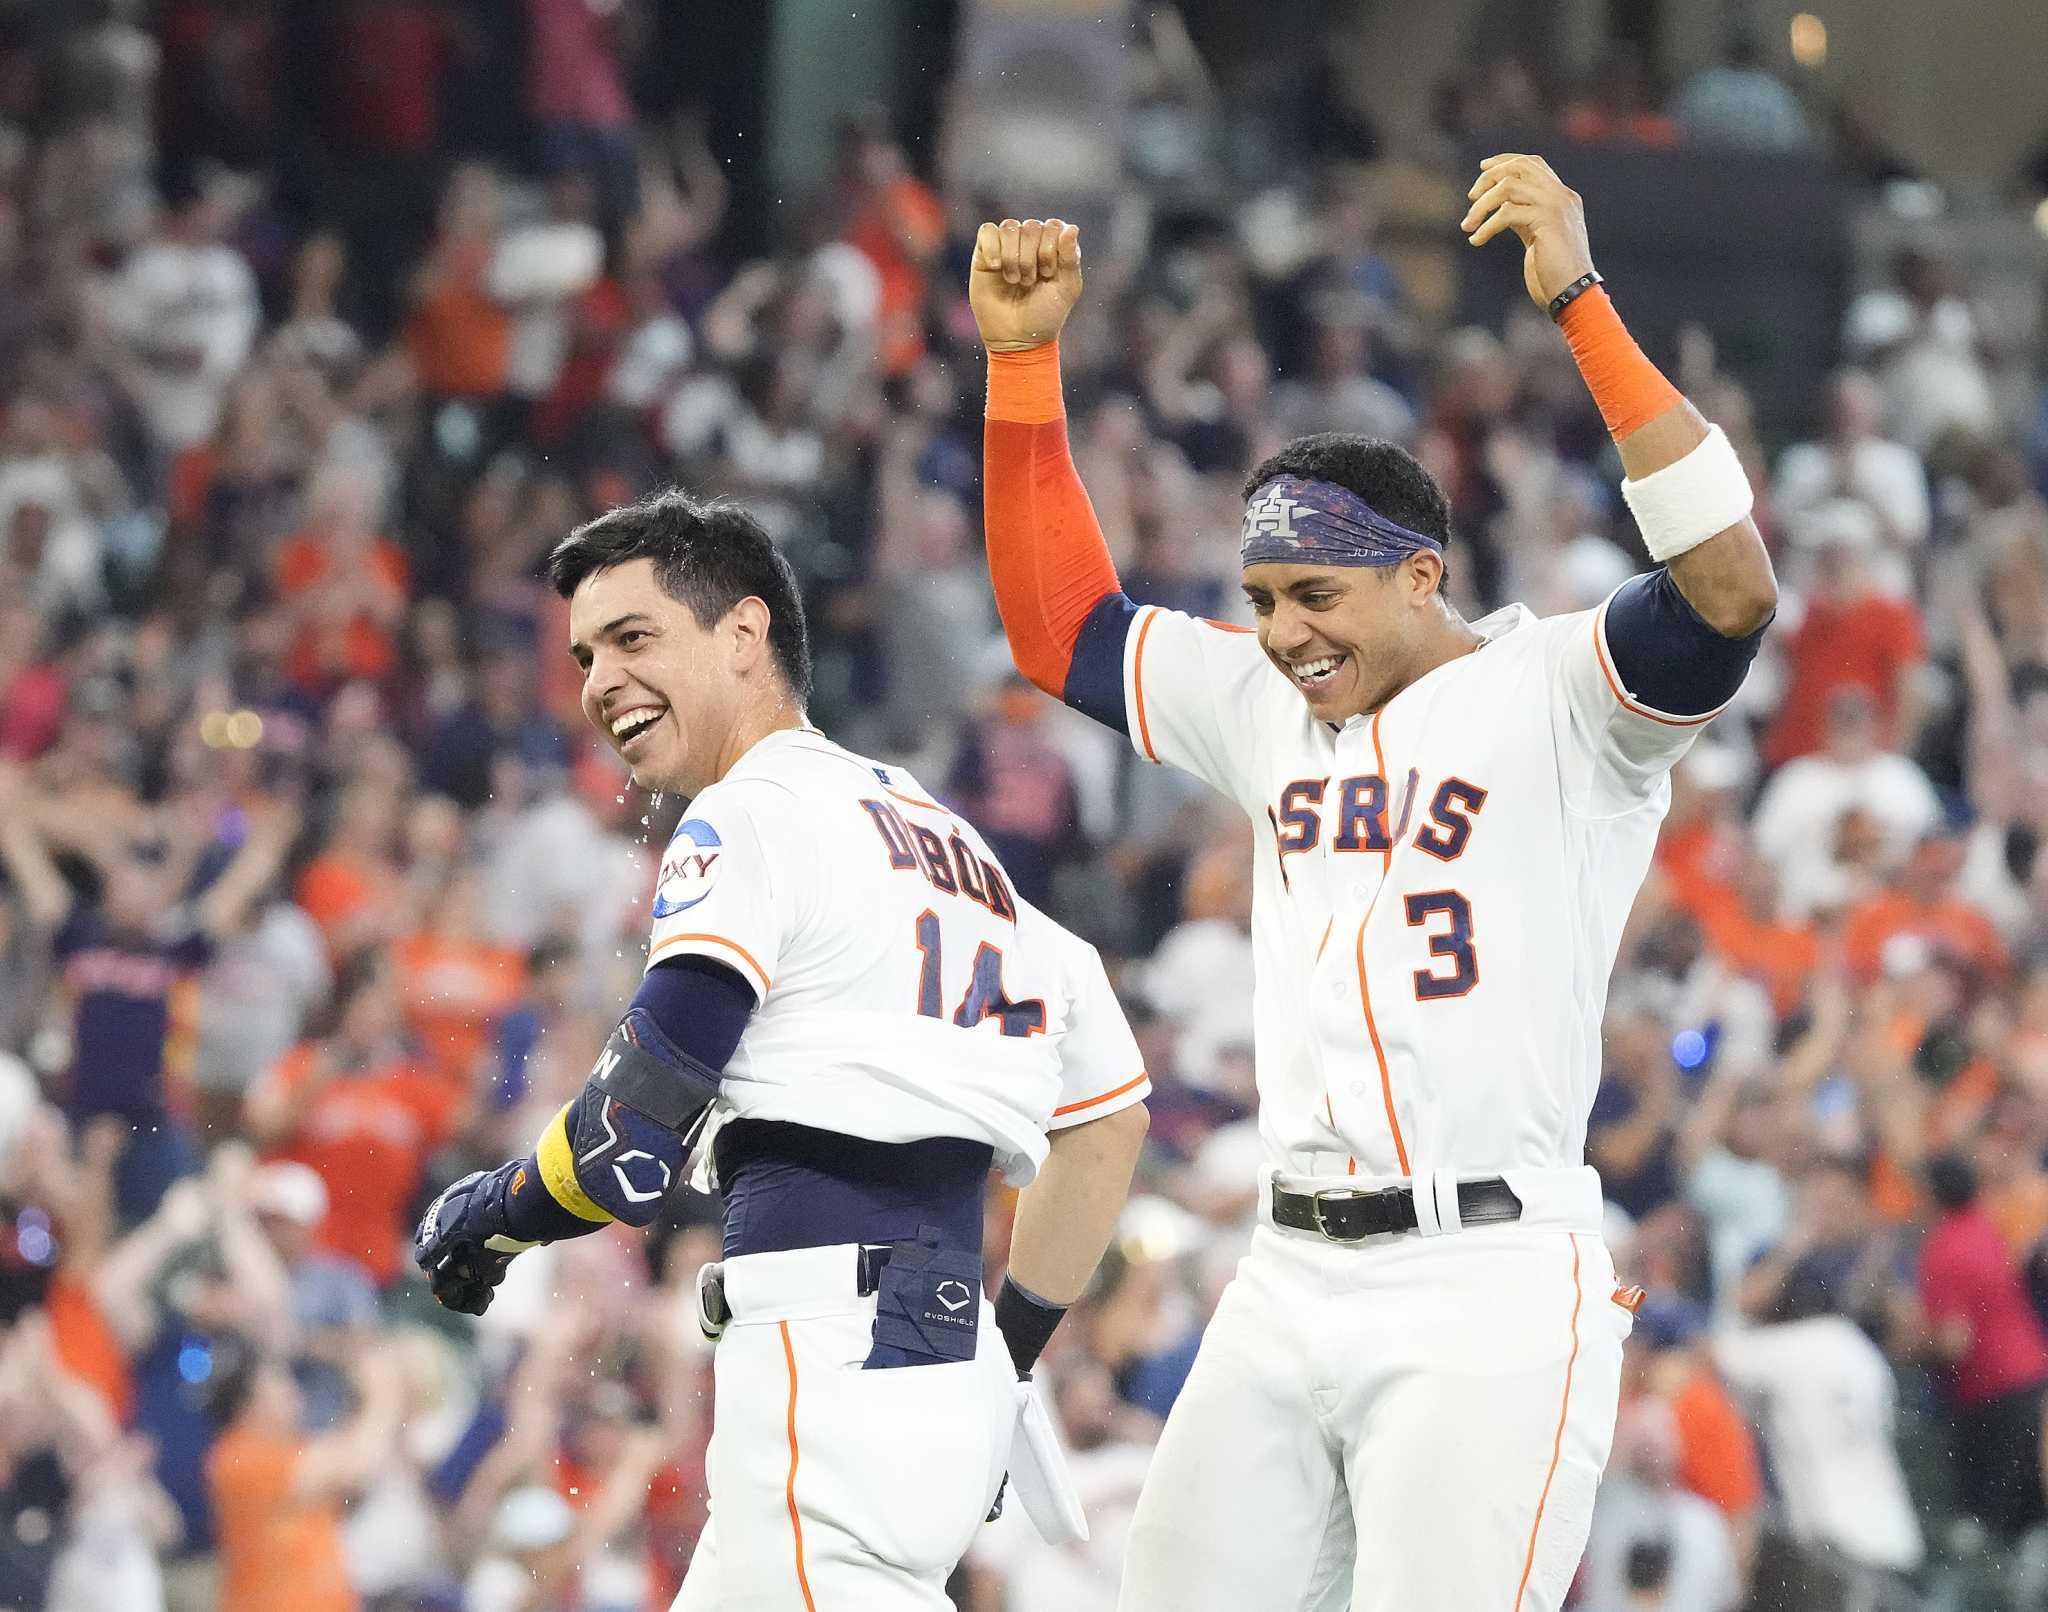 Ari breaks down his time in L.A. covering the Astros at the All